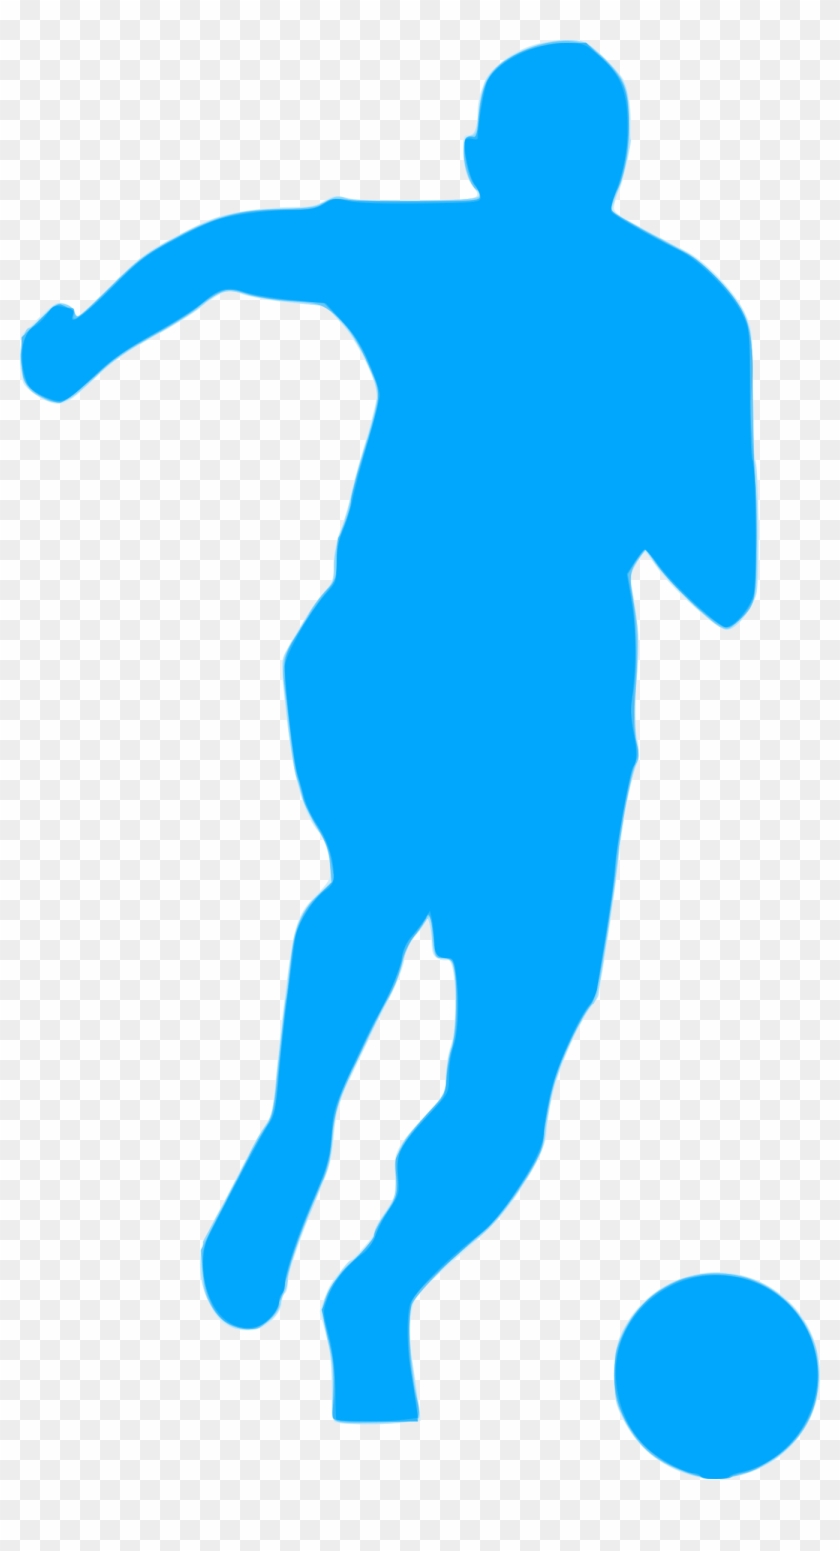 Silhouette Football 27 - Football Icon Png #317479